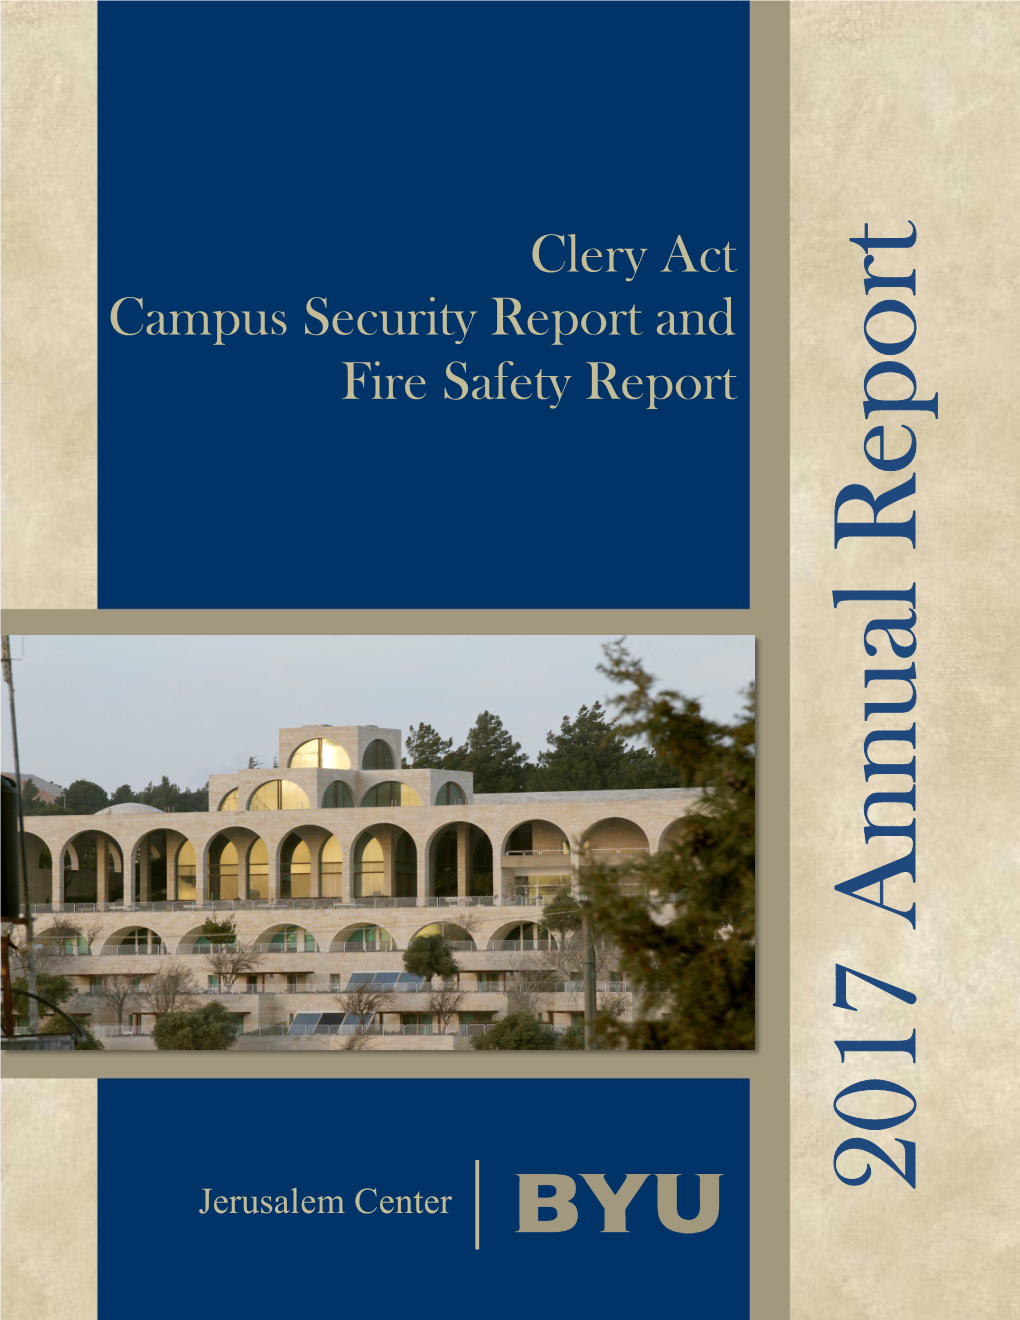 Clery Act Campus Security Report and Fire Safety Report